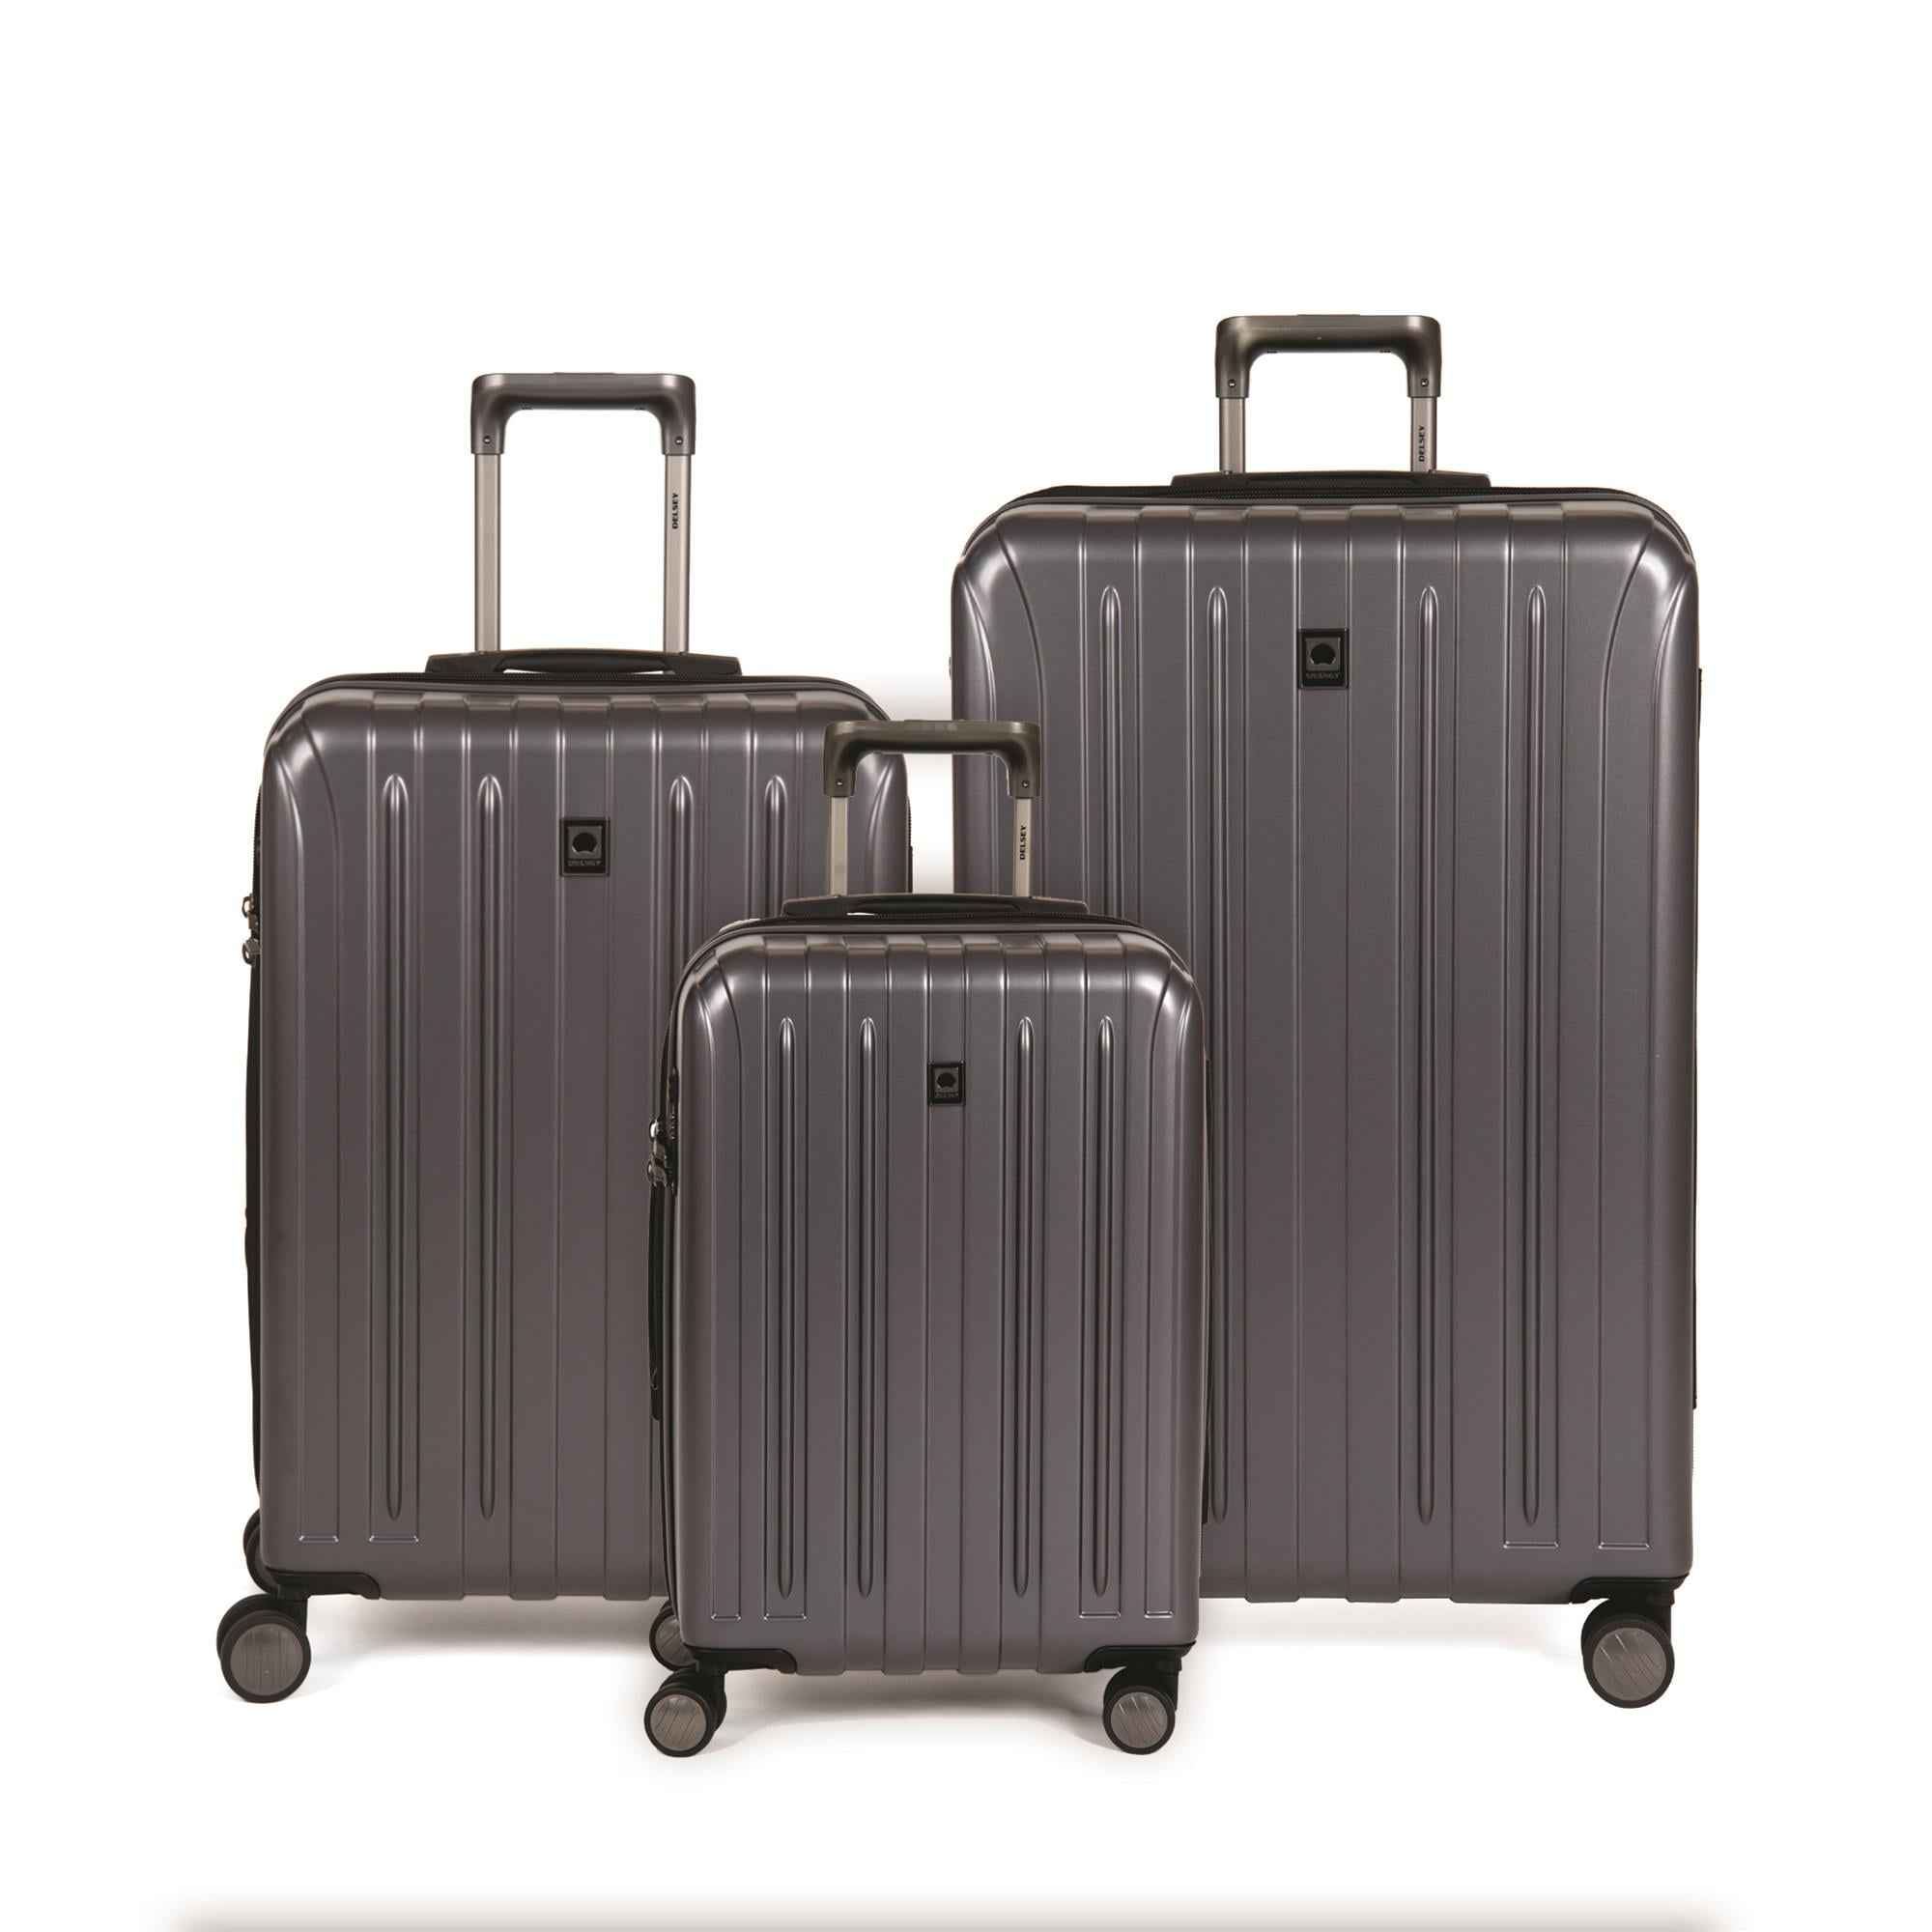 Delsey 3 Piece Luggage Set - A Match Made in Travel Heaven? - Luggage ...